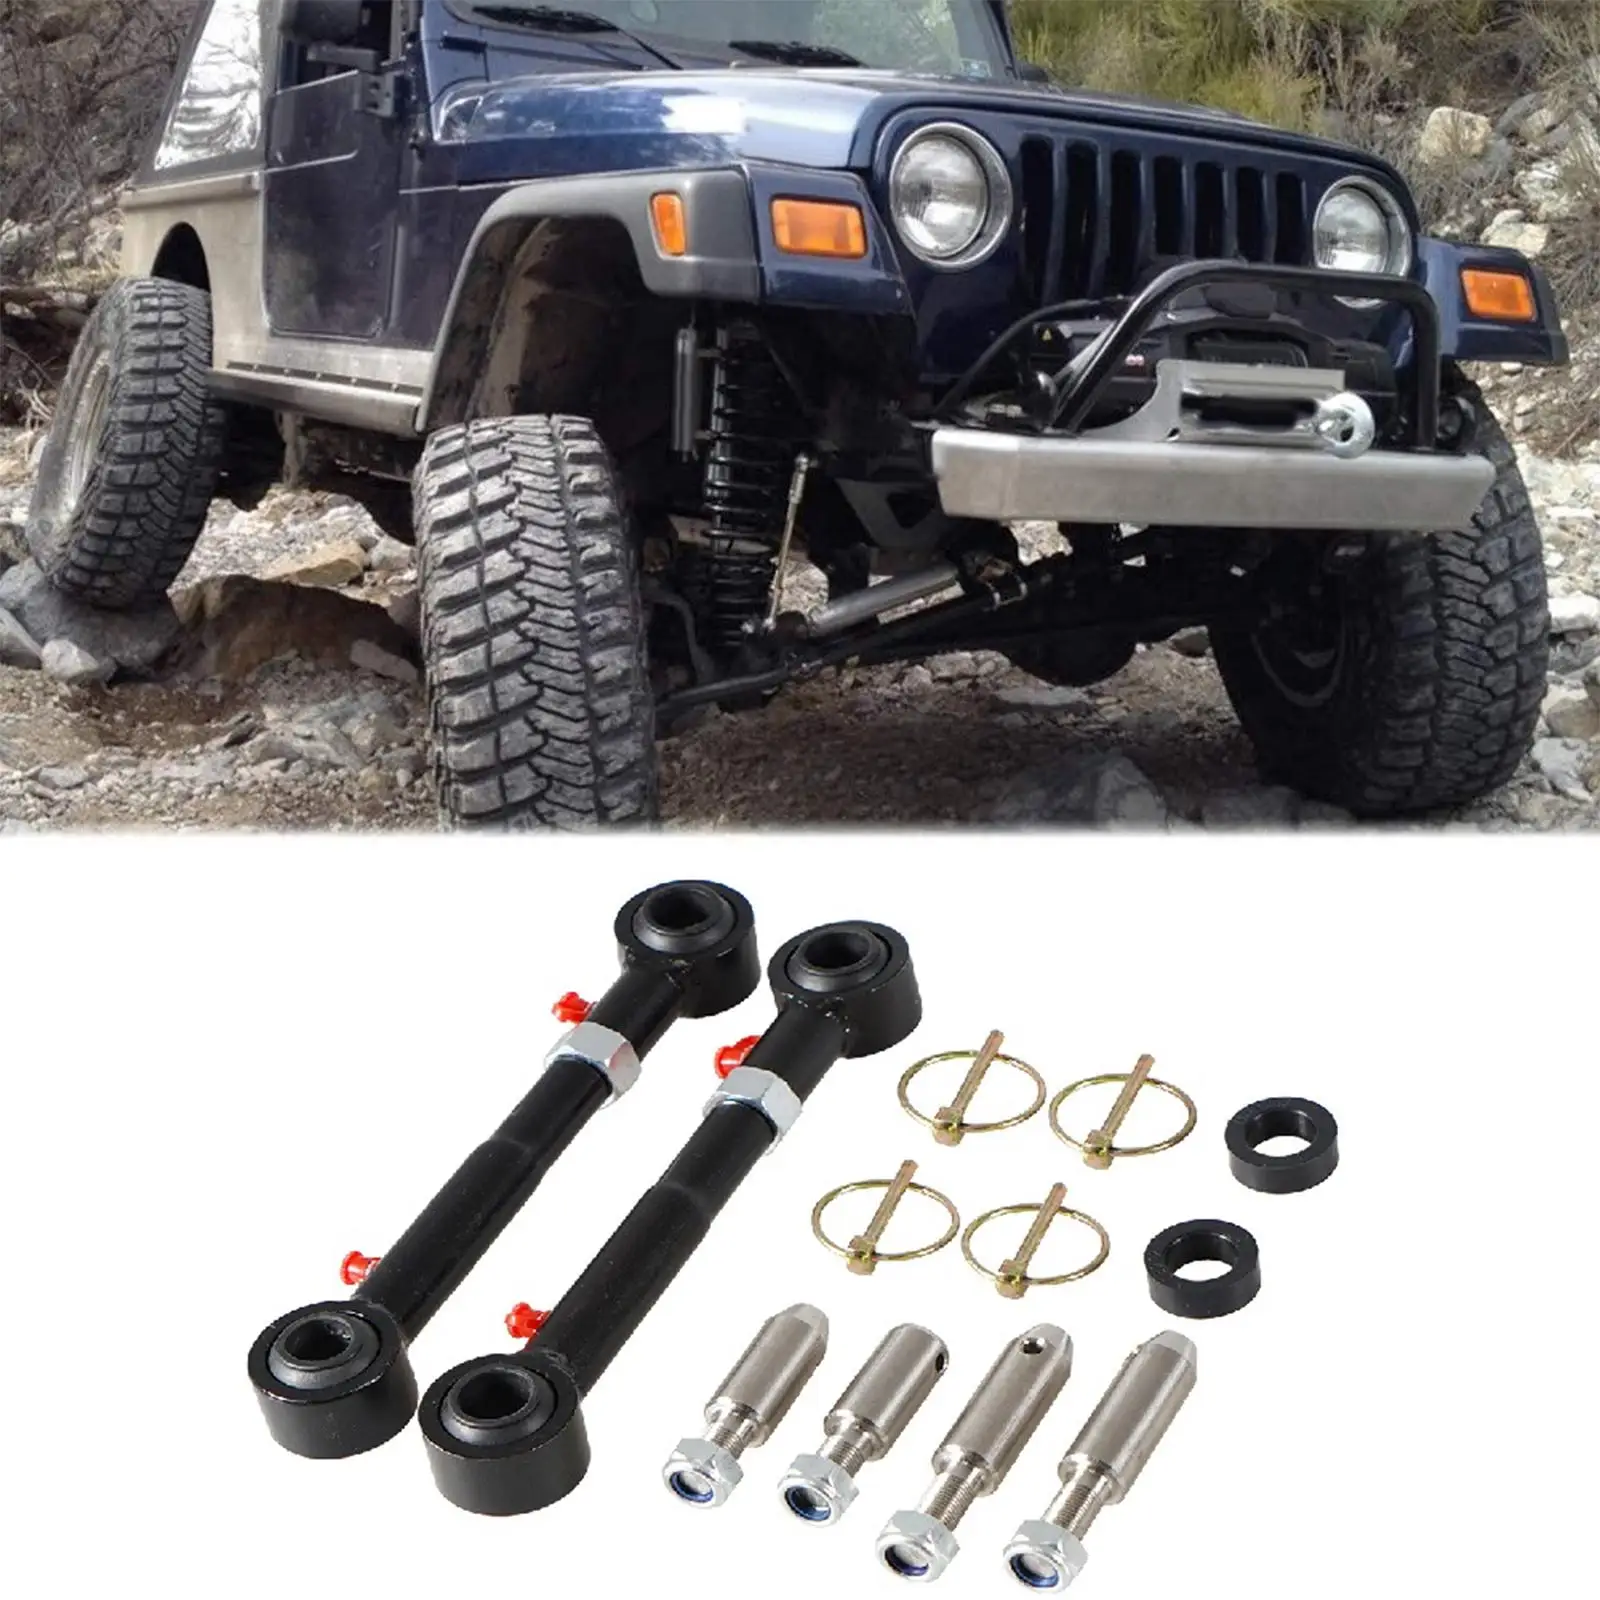 Adjustable Front Sway Bar Links Disconnects Stainless Steel for Jeep Wrangler JK Jku 2/4 Doors 2007-18 Parts Replaces Car